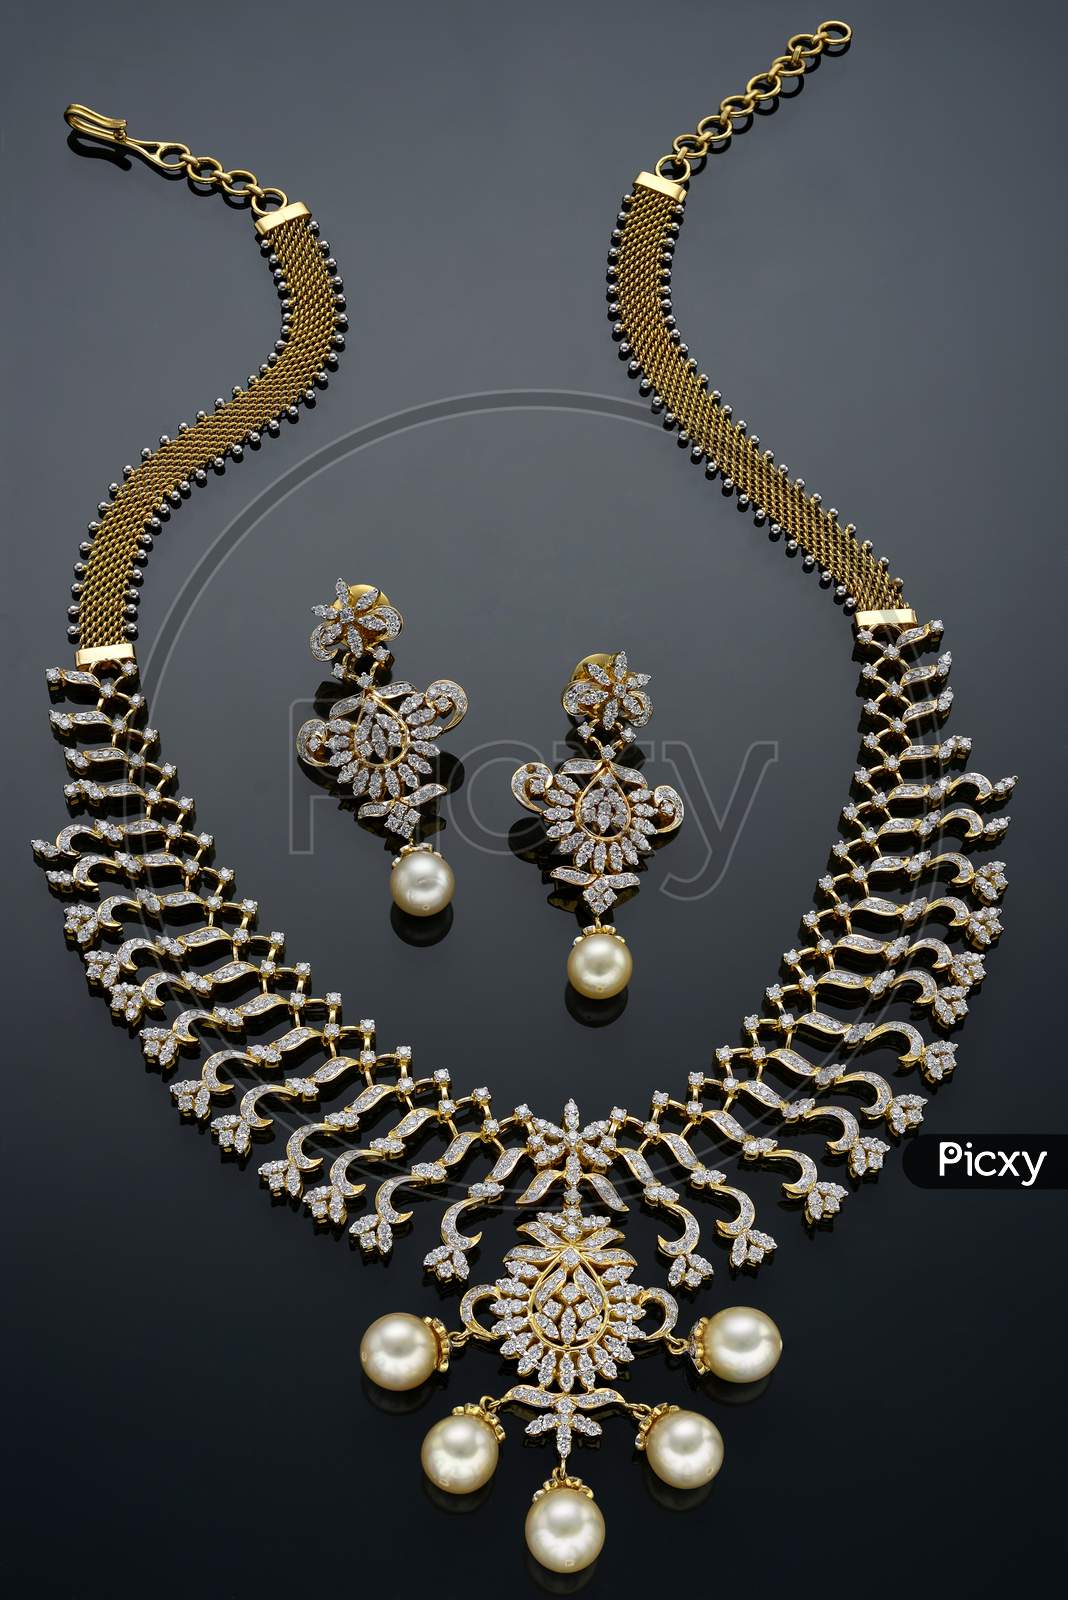 A Woman's necklace set with diamond work